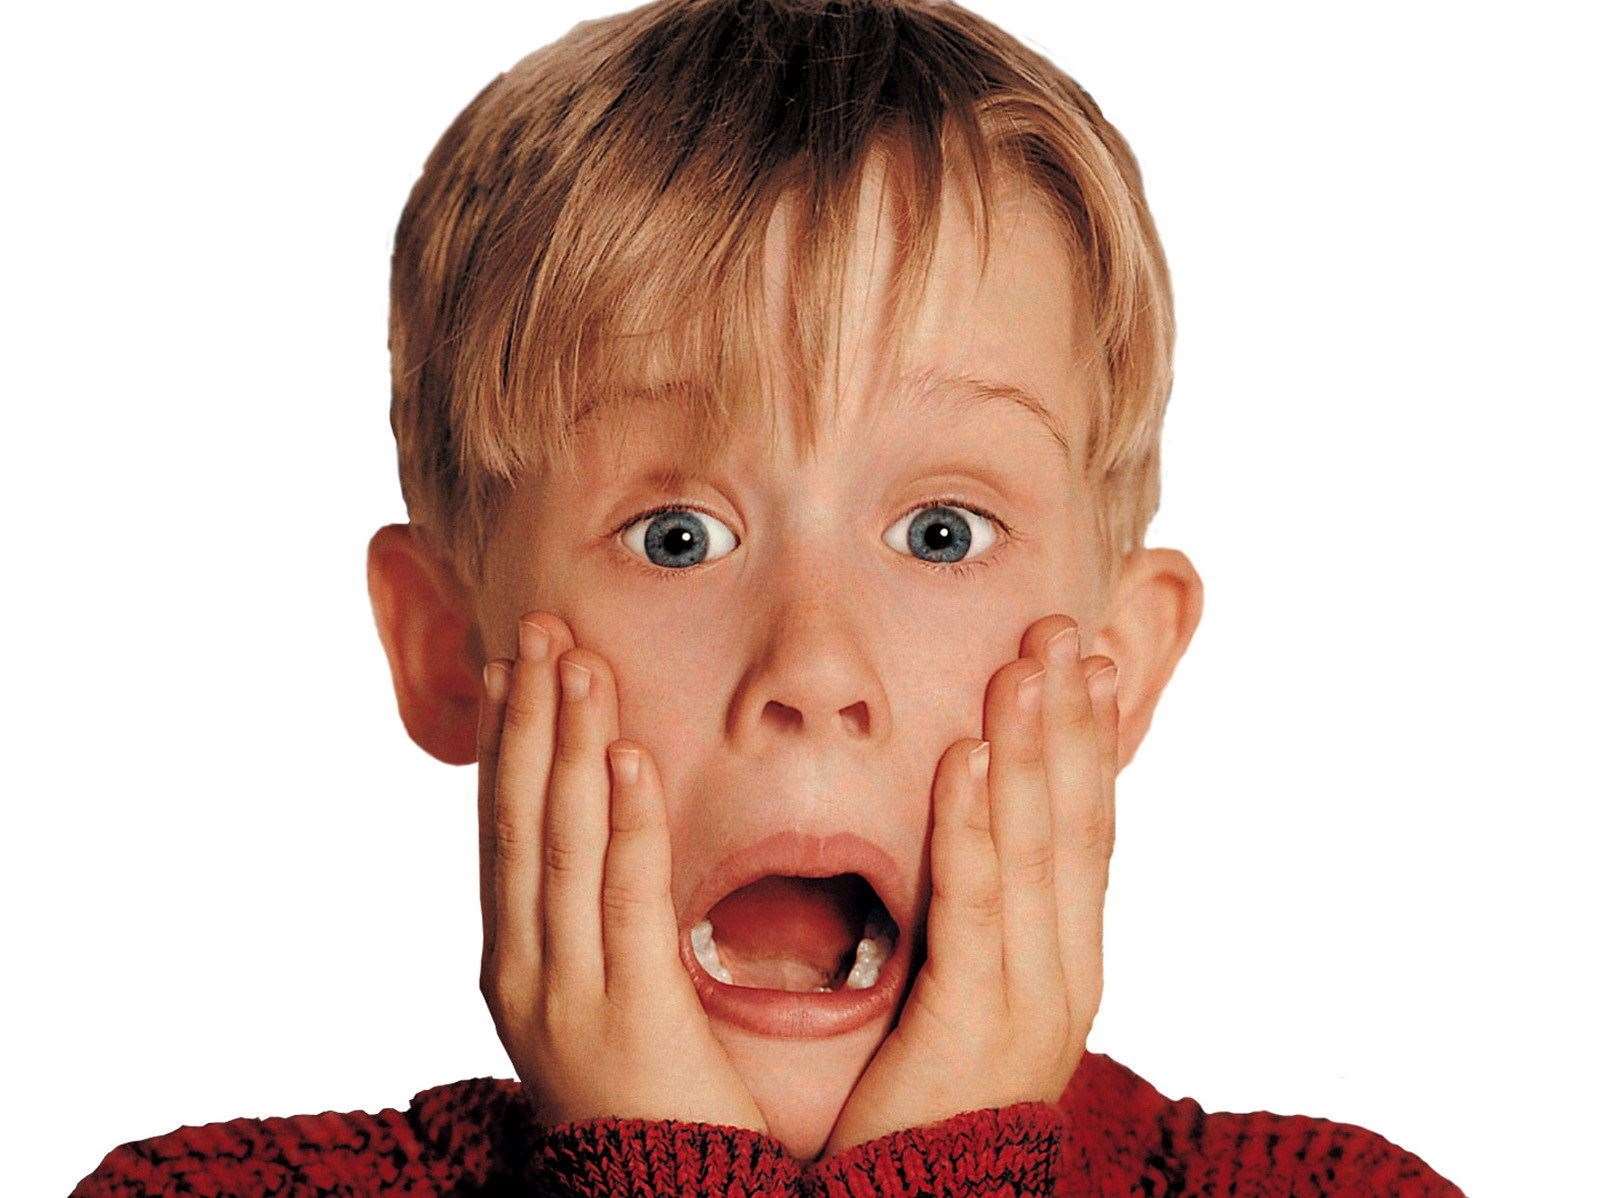 Bluewater cinema will screen Home Alone in October